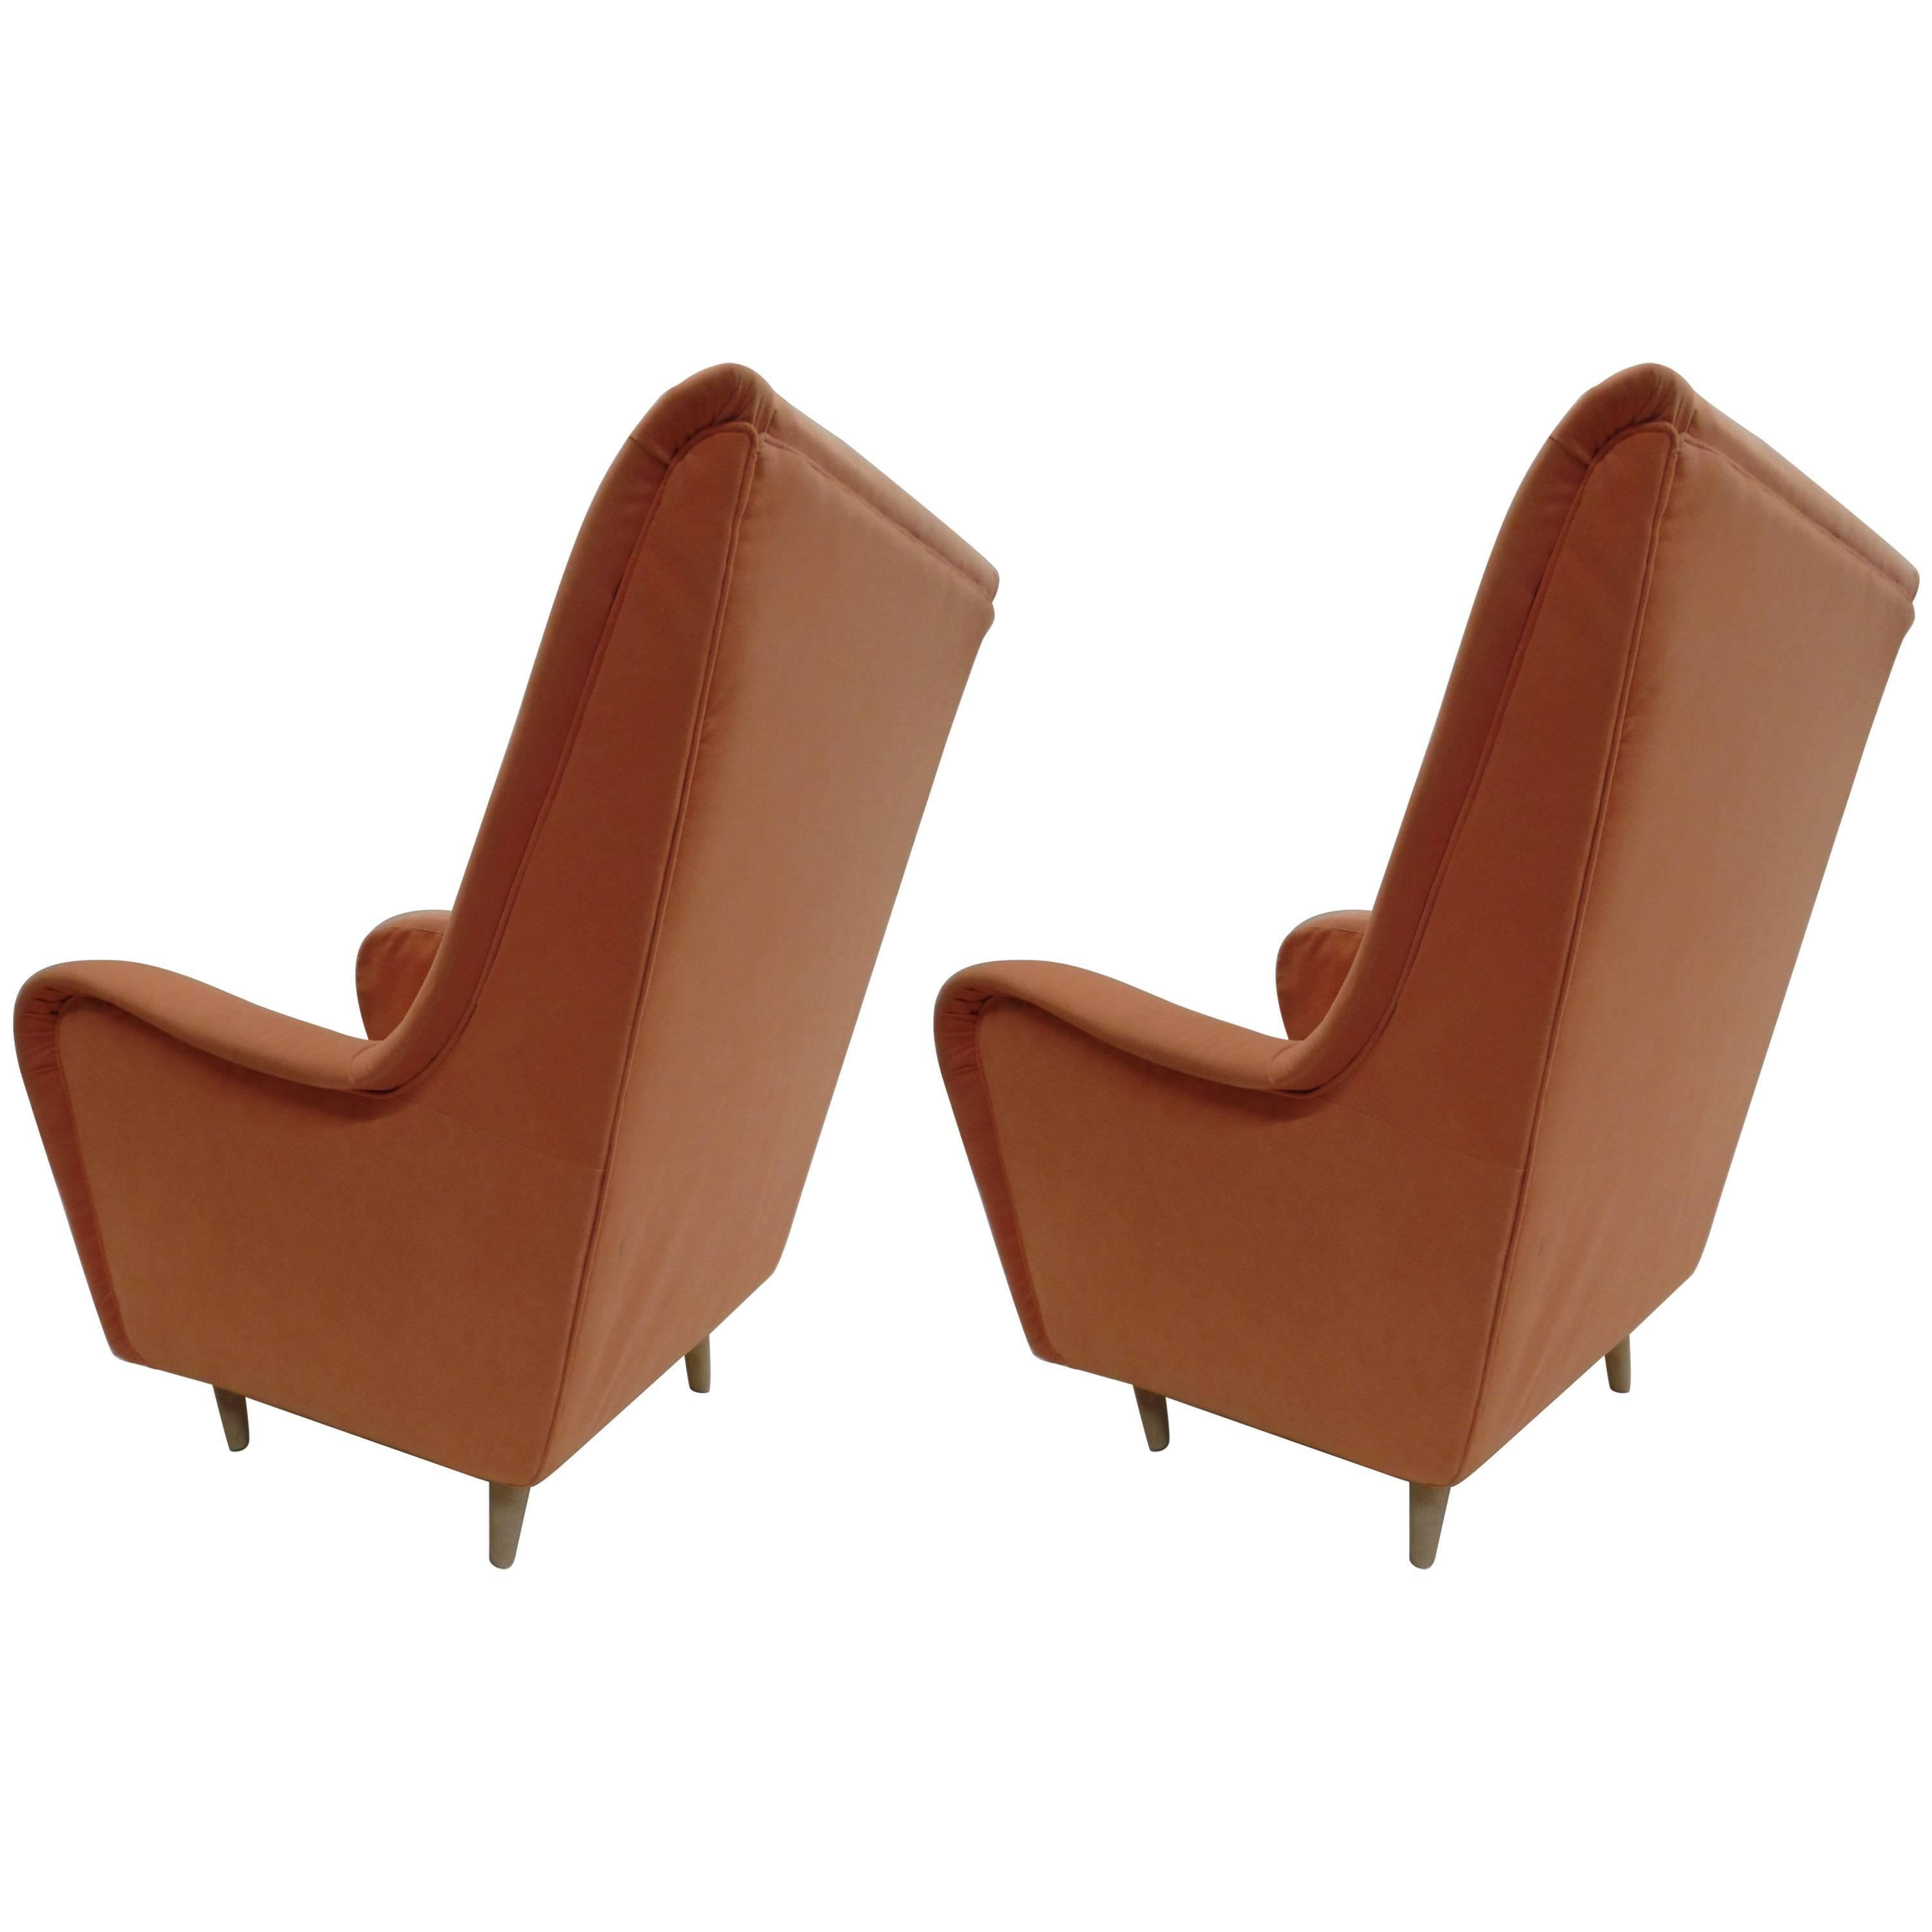 Elegant Pair of Italian Mid-Century Modern Wingback / Hi Back Lounge Chairs /  armchairs by Paolo Buffa. These chairs are large, deep and comfortable; They have sensuous lines and a flowing, organic forms. Upholstery is original and re-upholstery is